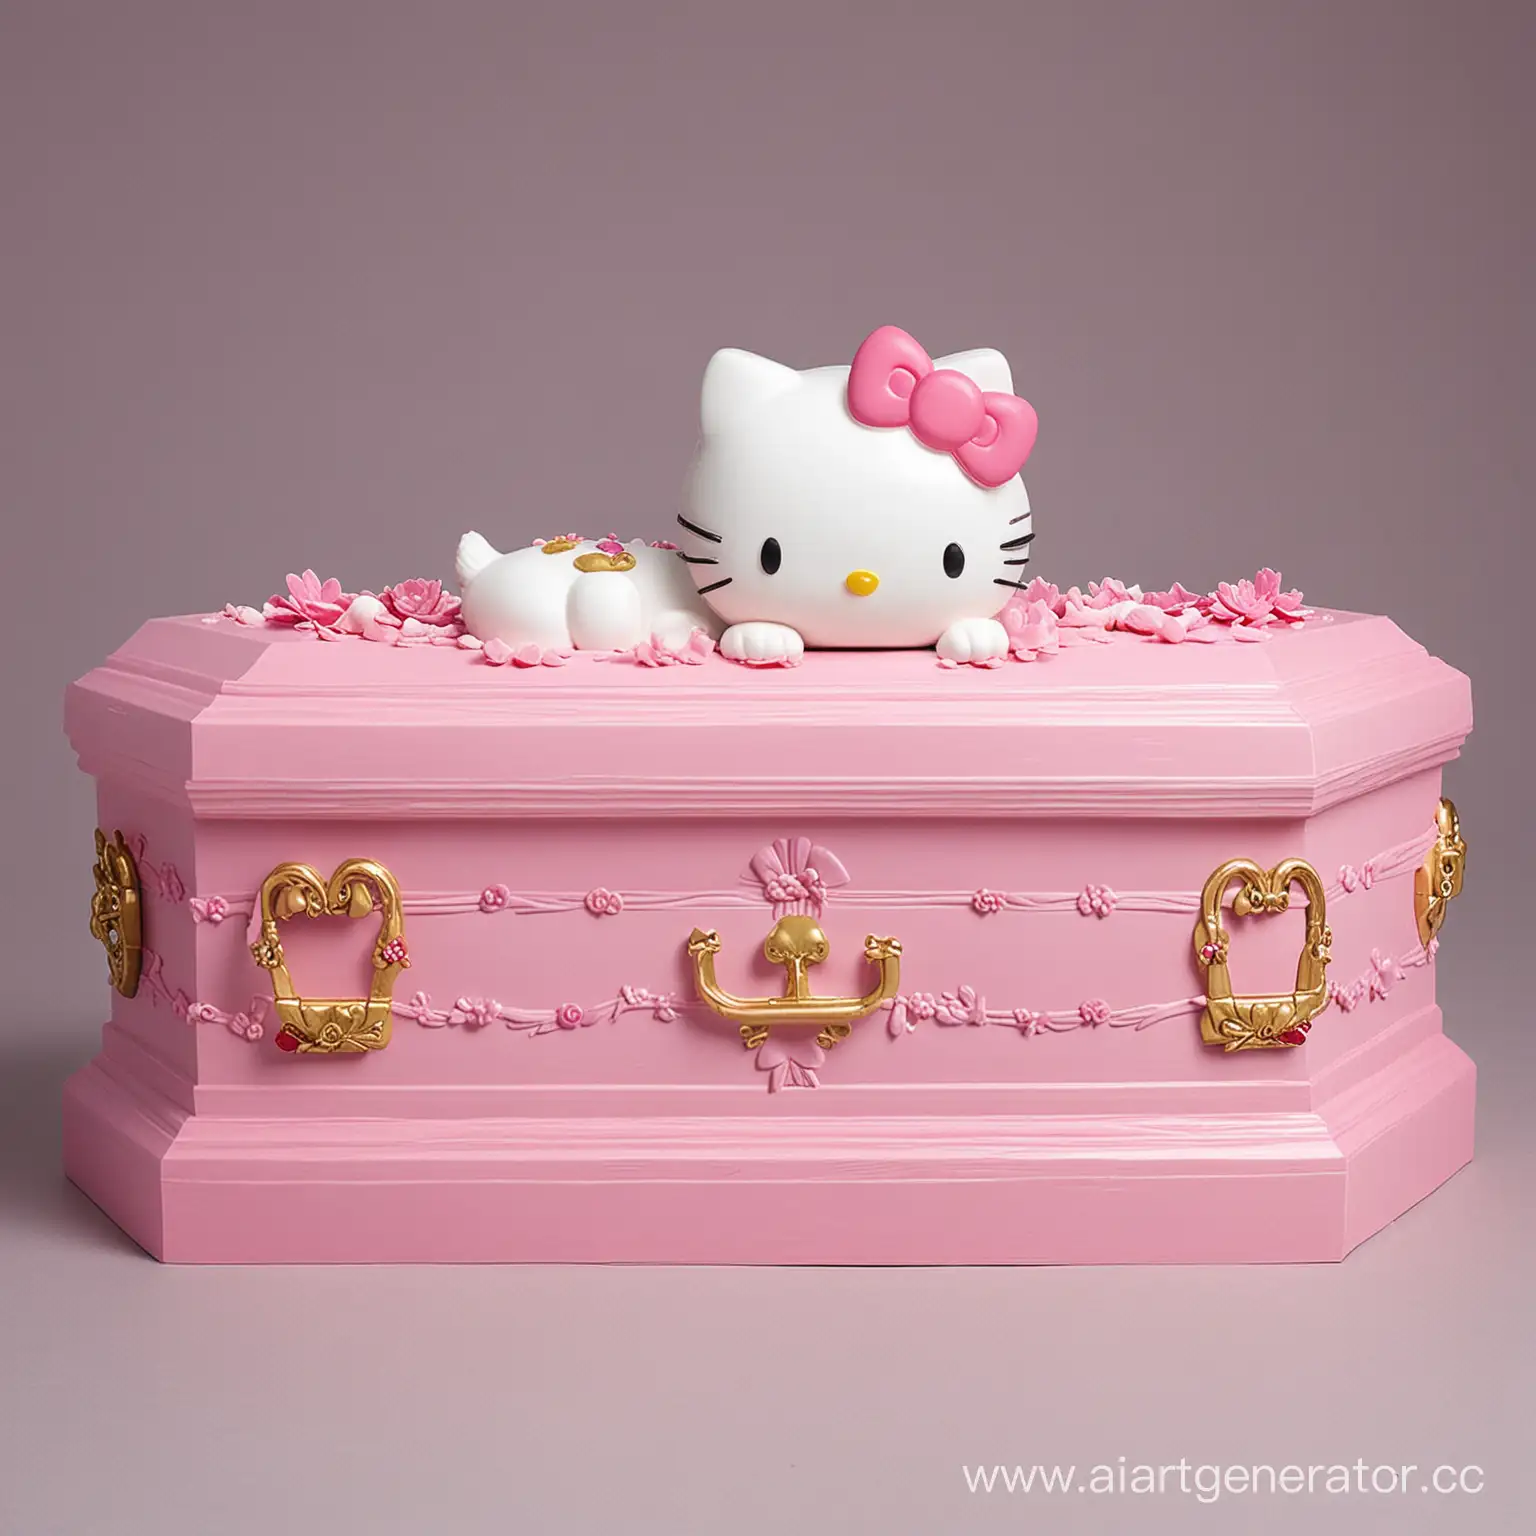 Whimsical-Coffin-with-Duck-and-Hello-Kitty-Design